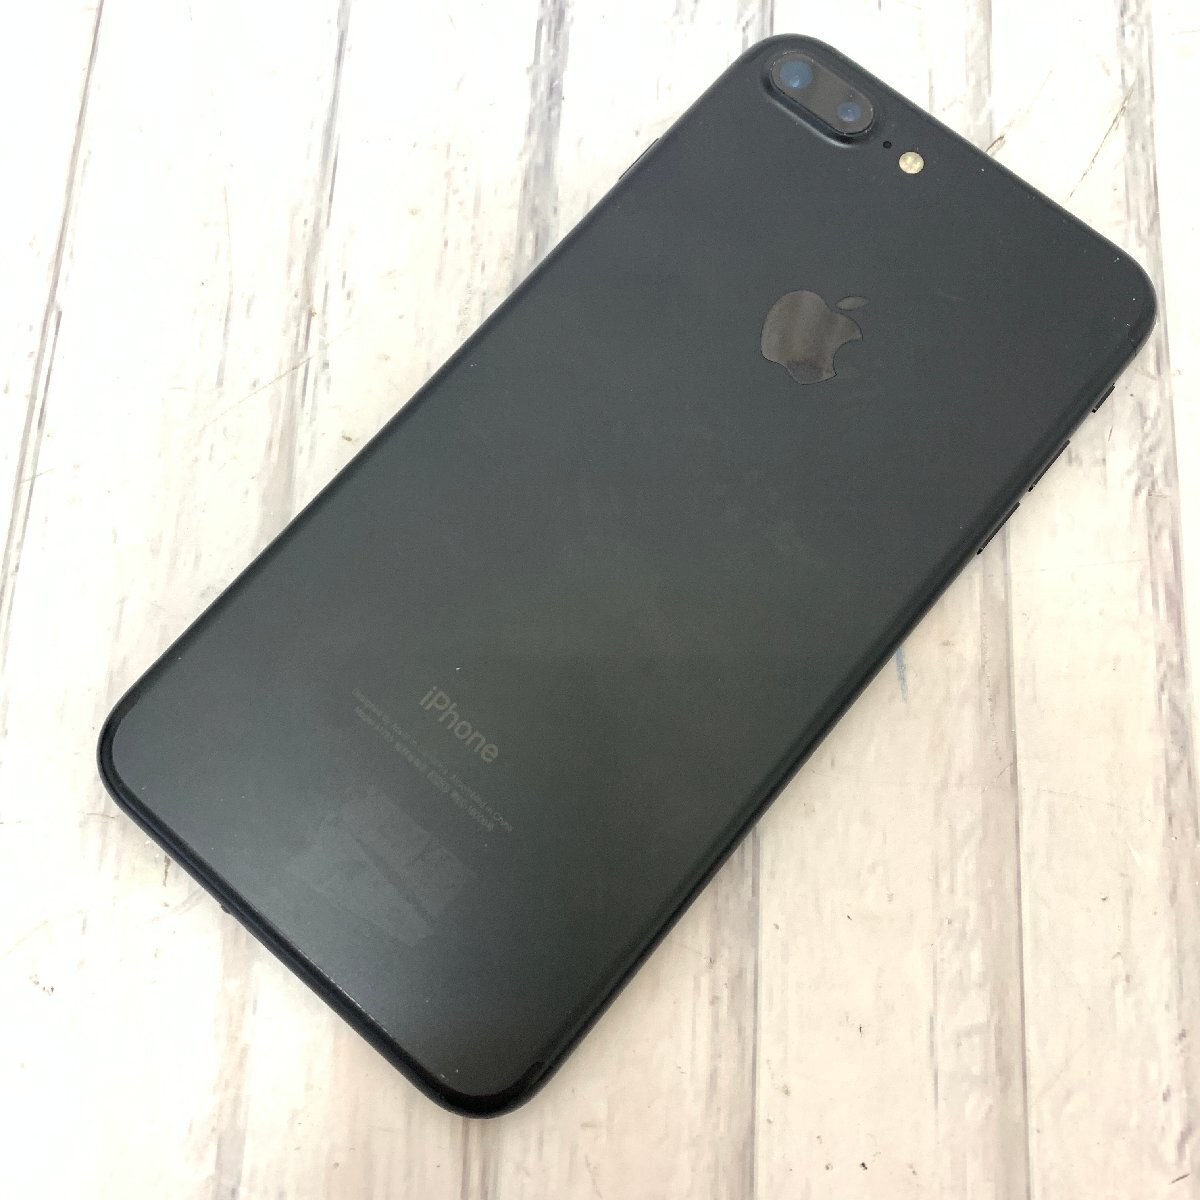 s001 A3.1 docomo Apple iPhone7plus ブラック A1785 32G 初期化済み 動作品 白ロムの画像1